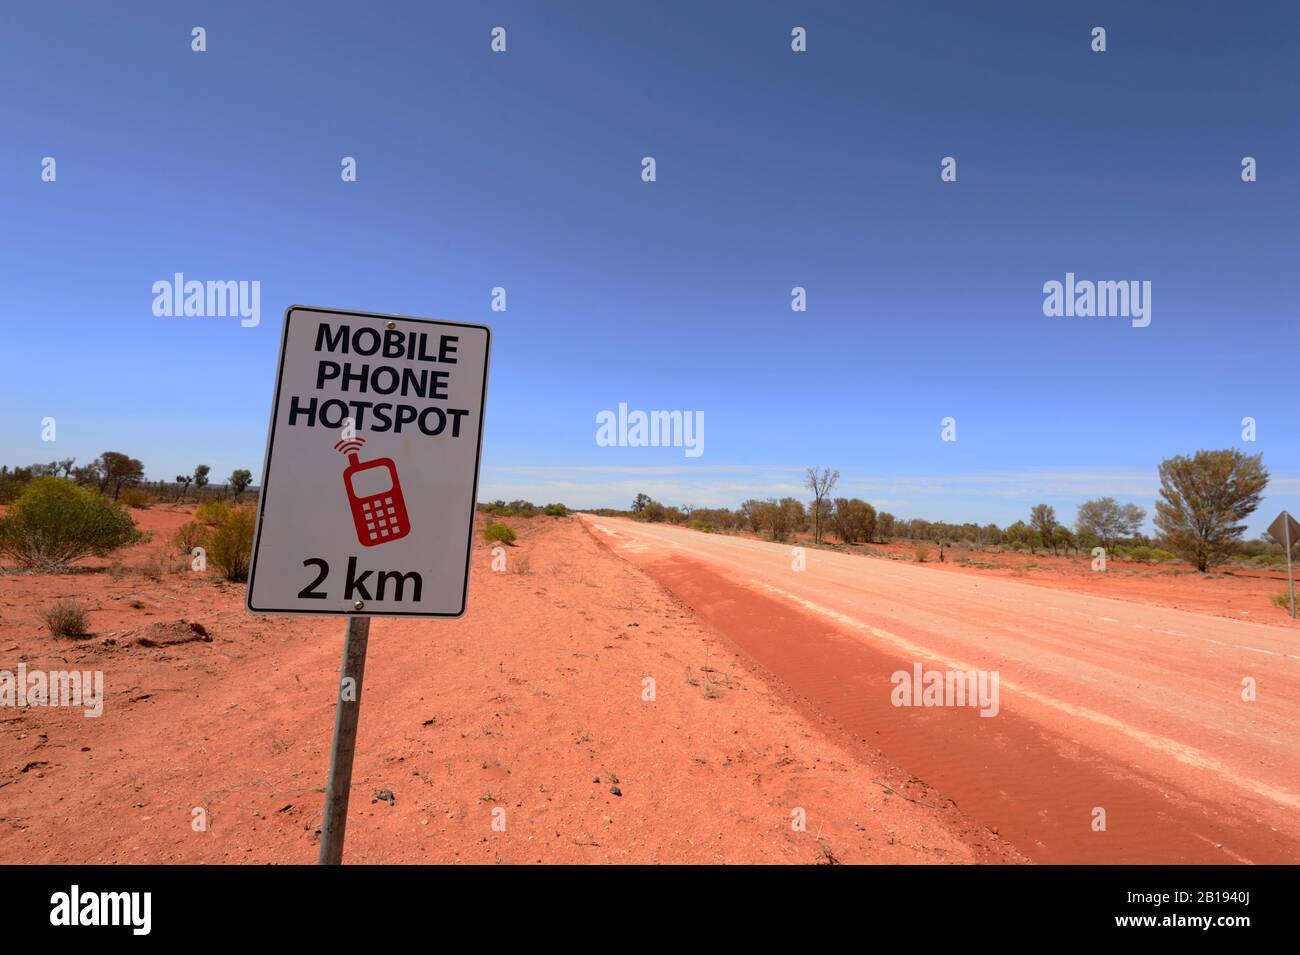 Mobile Phone Hotspot sign along a dirt road in the Australian Outback, Northern Territory, NT, Australia Stock Photo